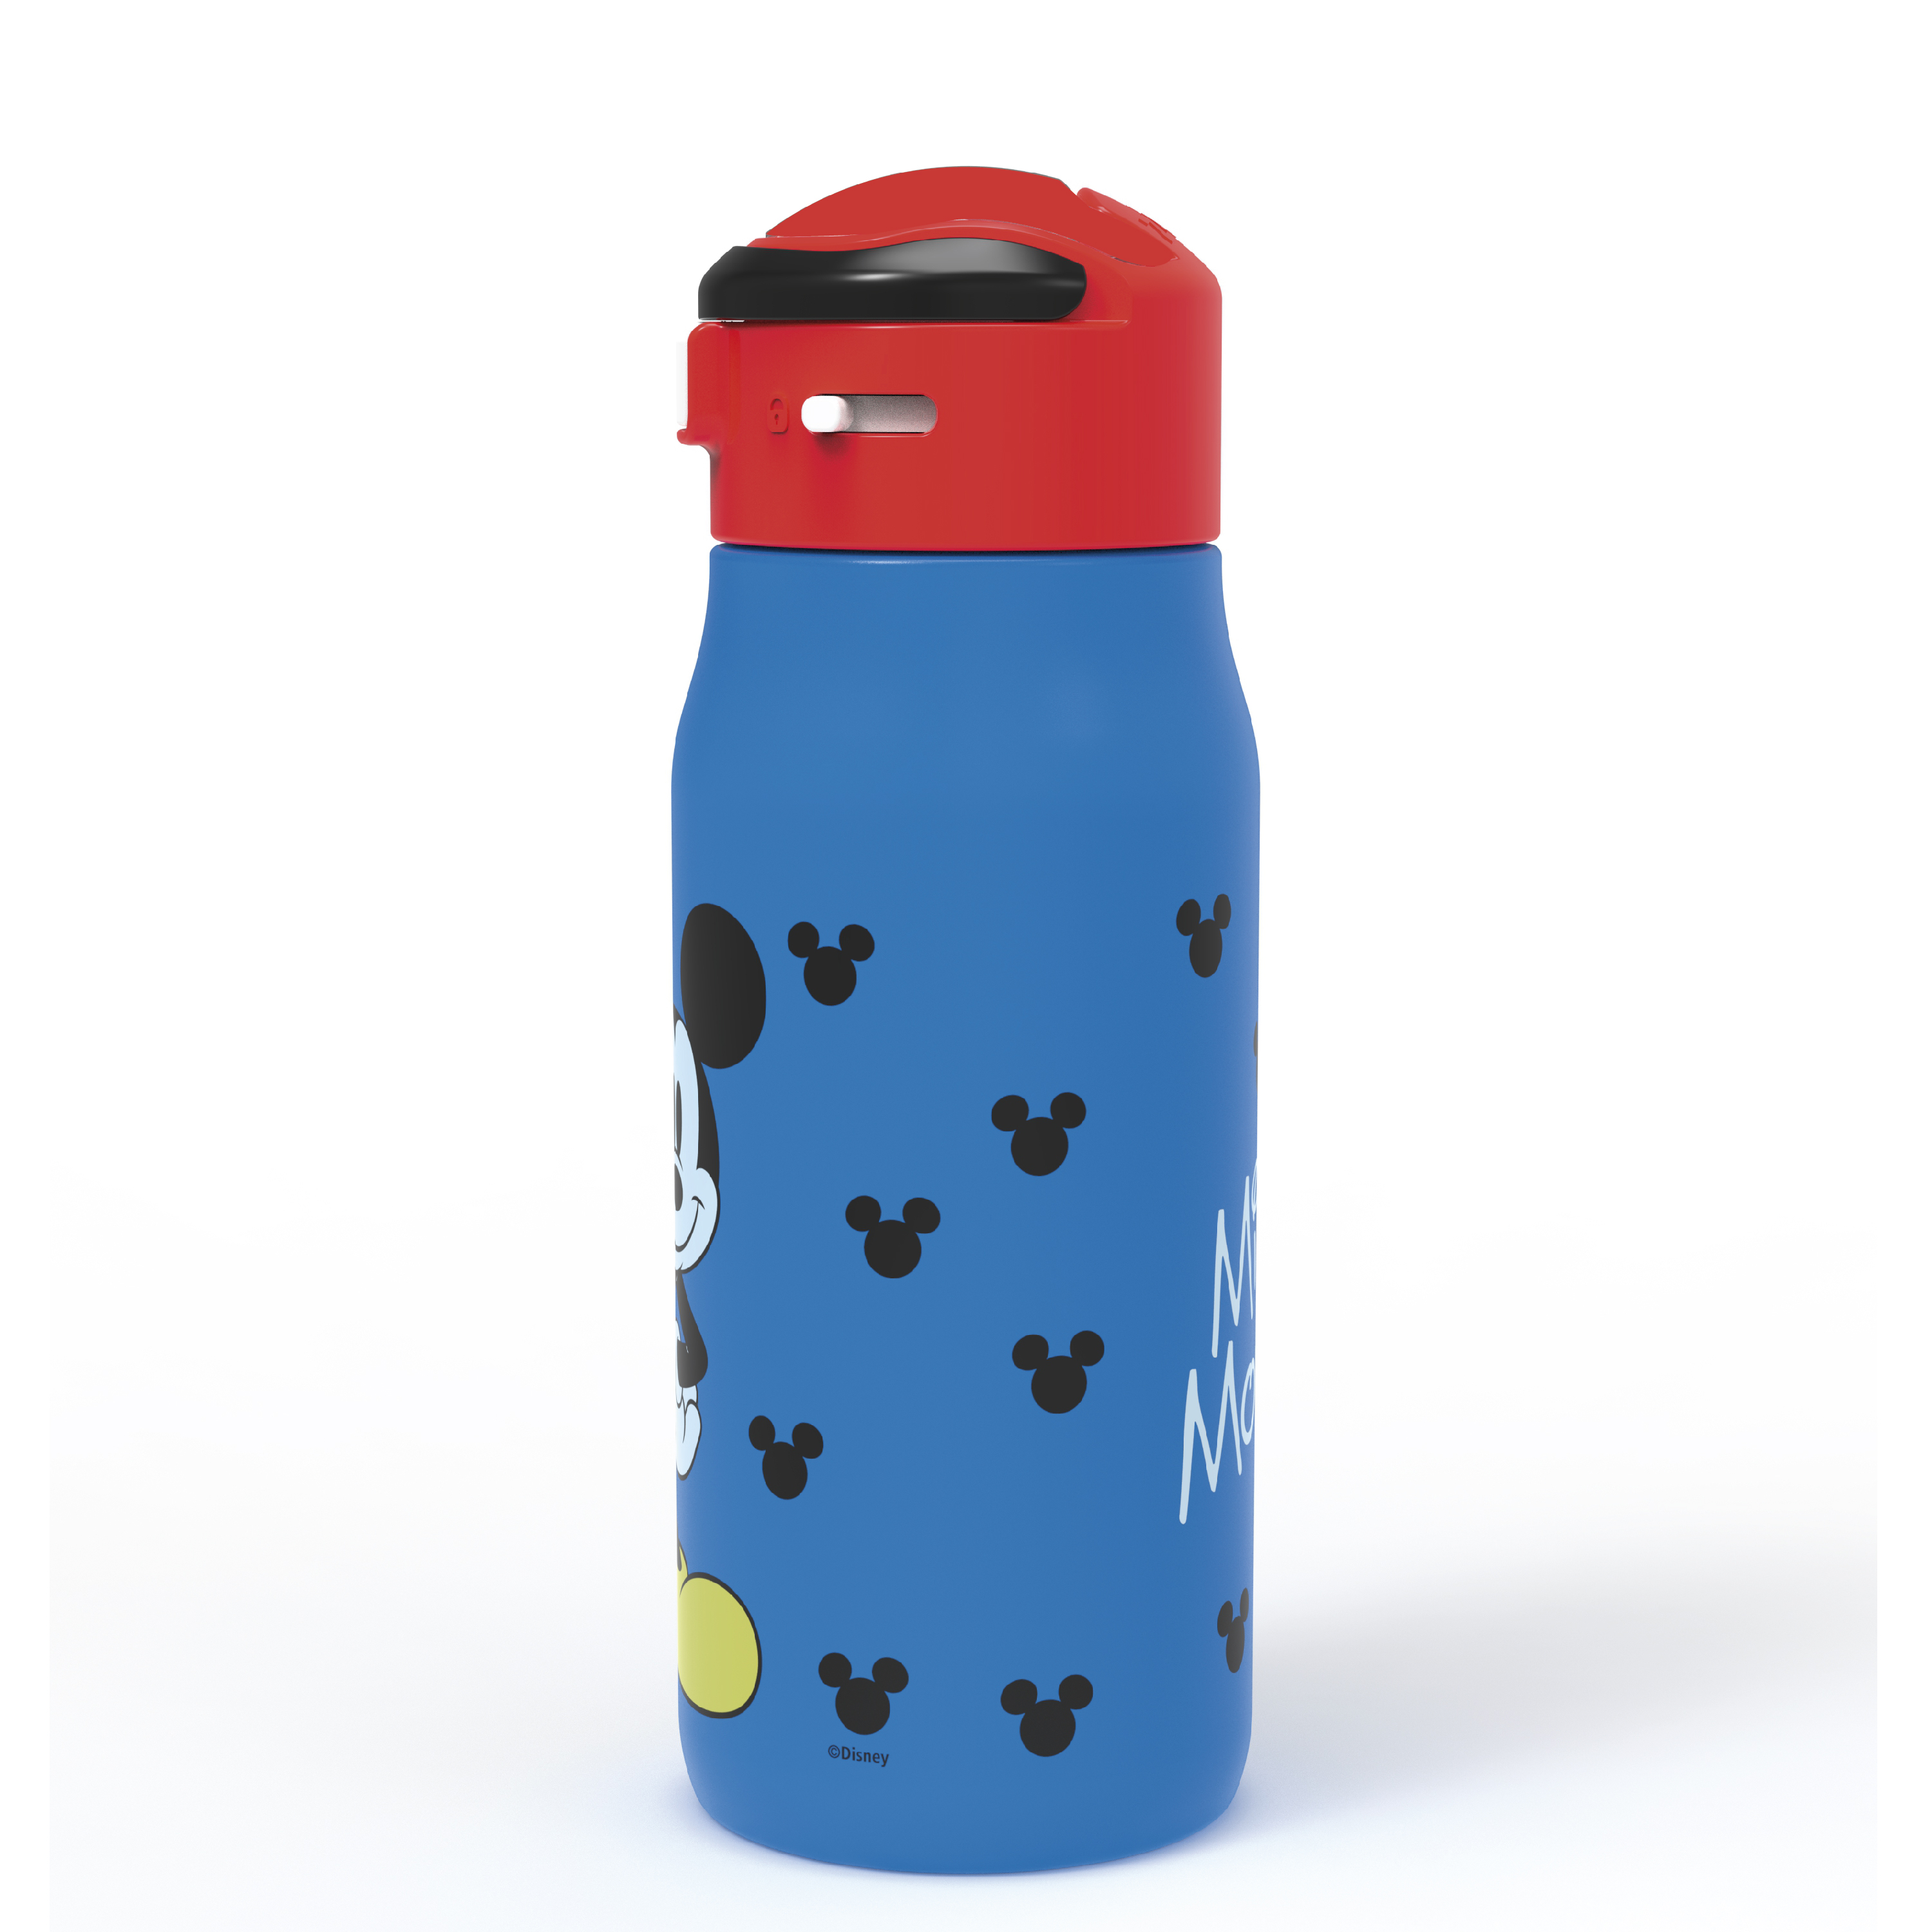 Disney 13.5 ounce Mesa Double Wall Insulated Stainless Steel Water Bottle, Mickey Mouse slideshow image 2